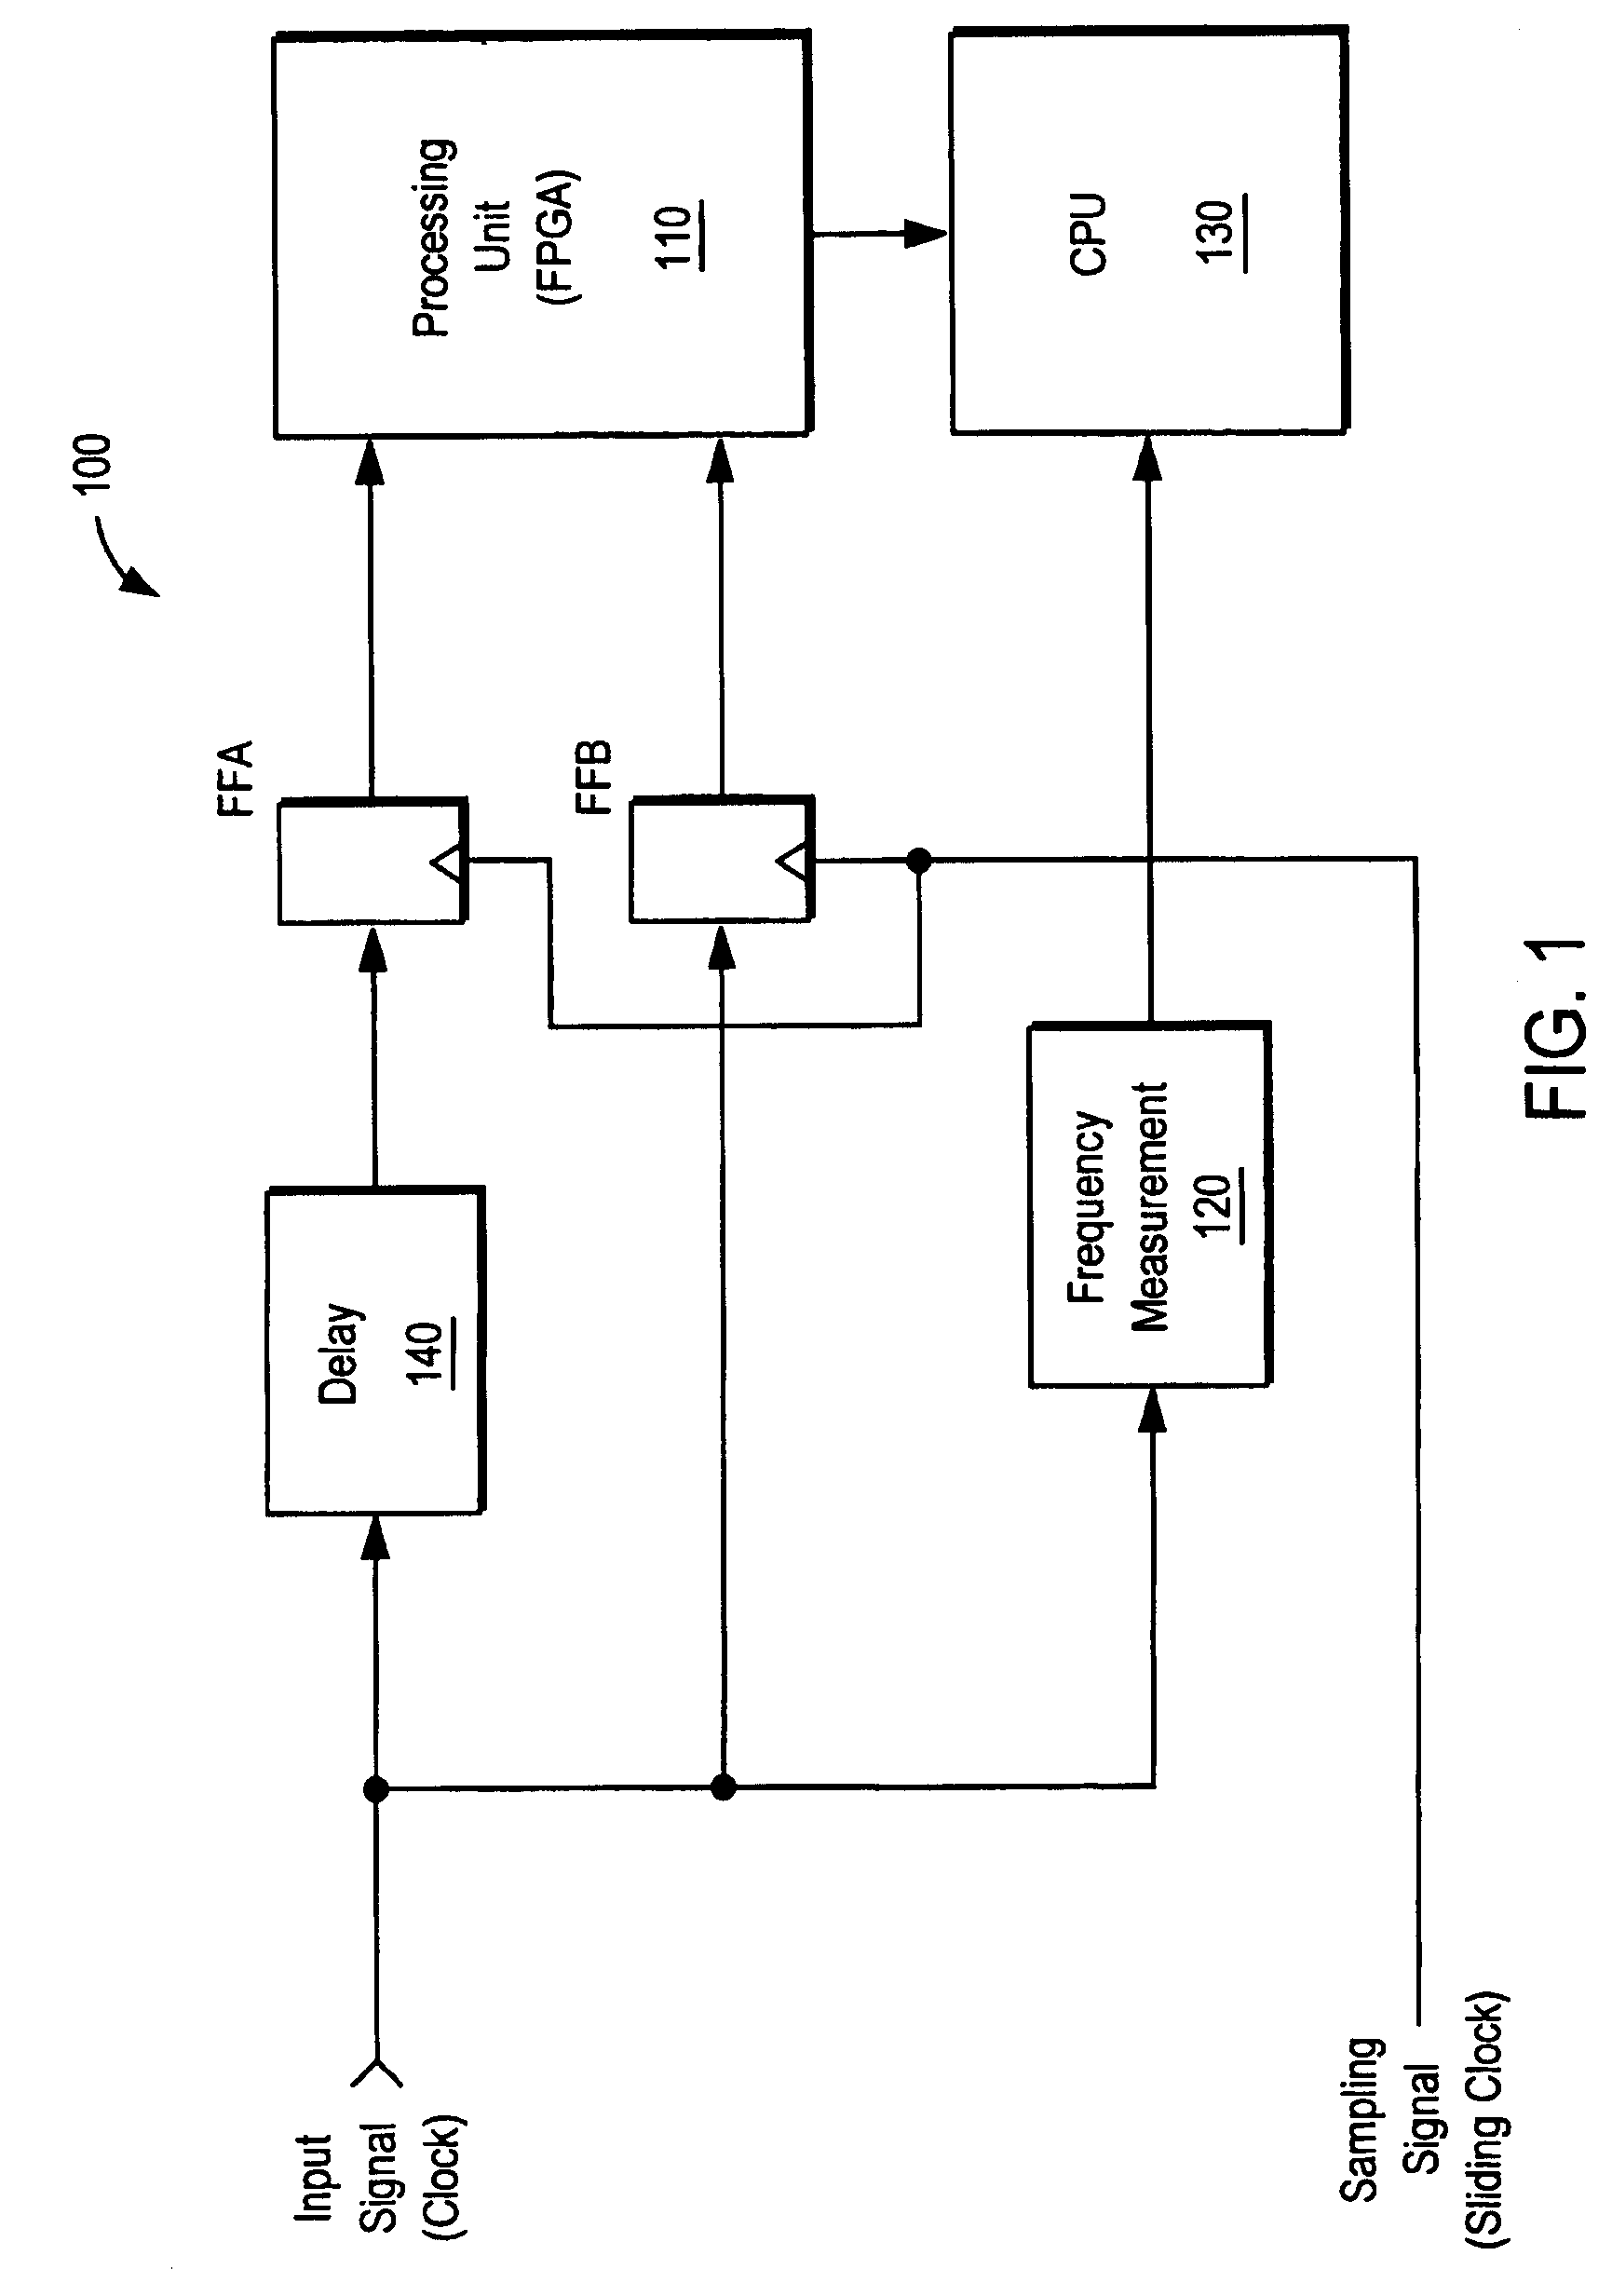 Method and apparatus for delay line calibration